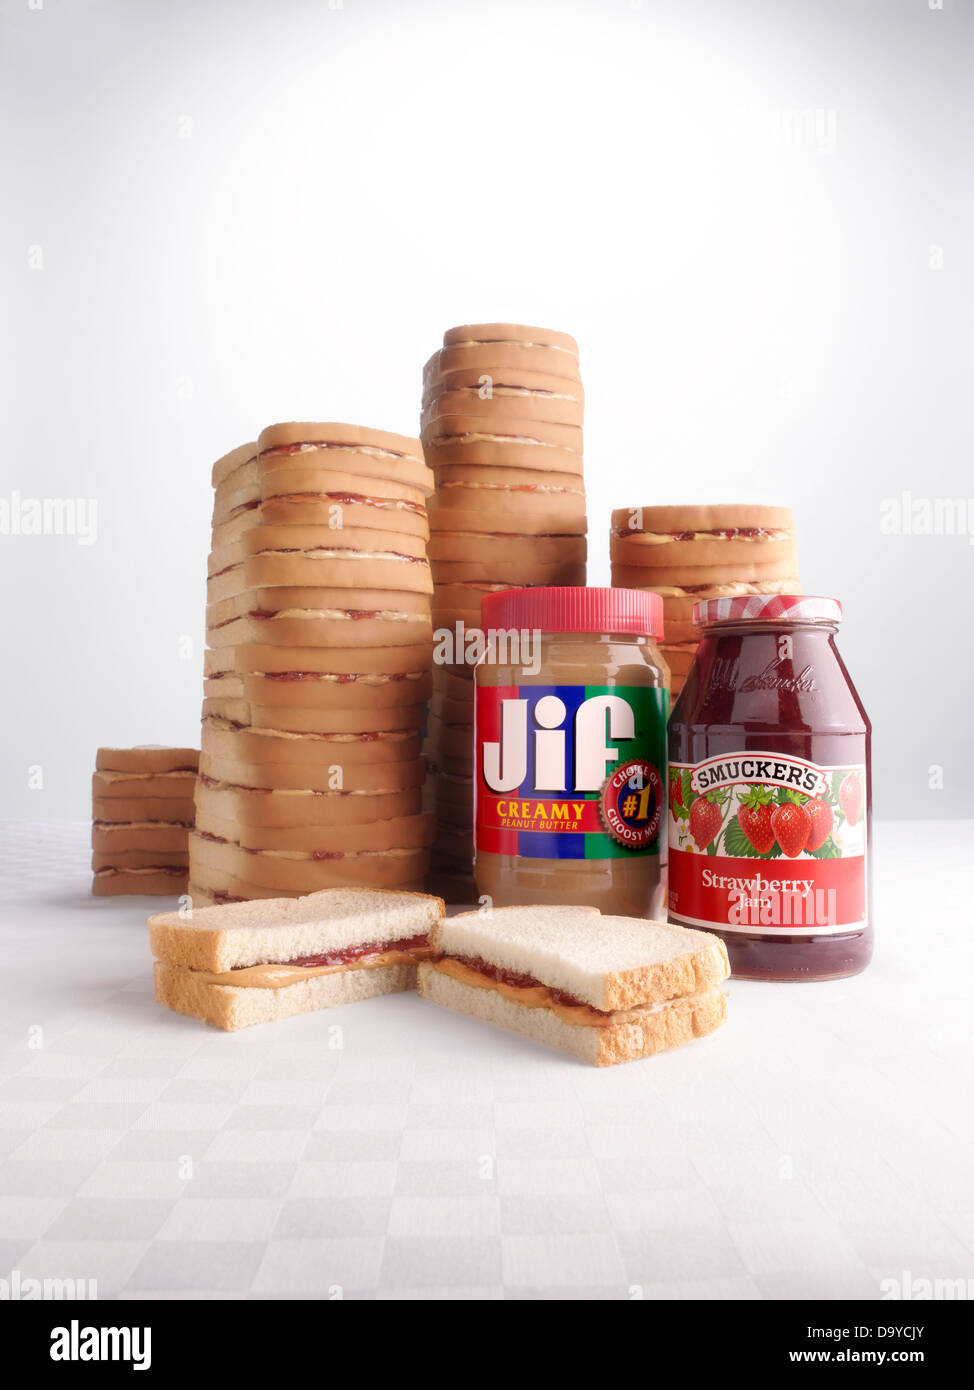 Jif and Smuckers Peanut Butter and Jelly Sandwiches Stock Photo